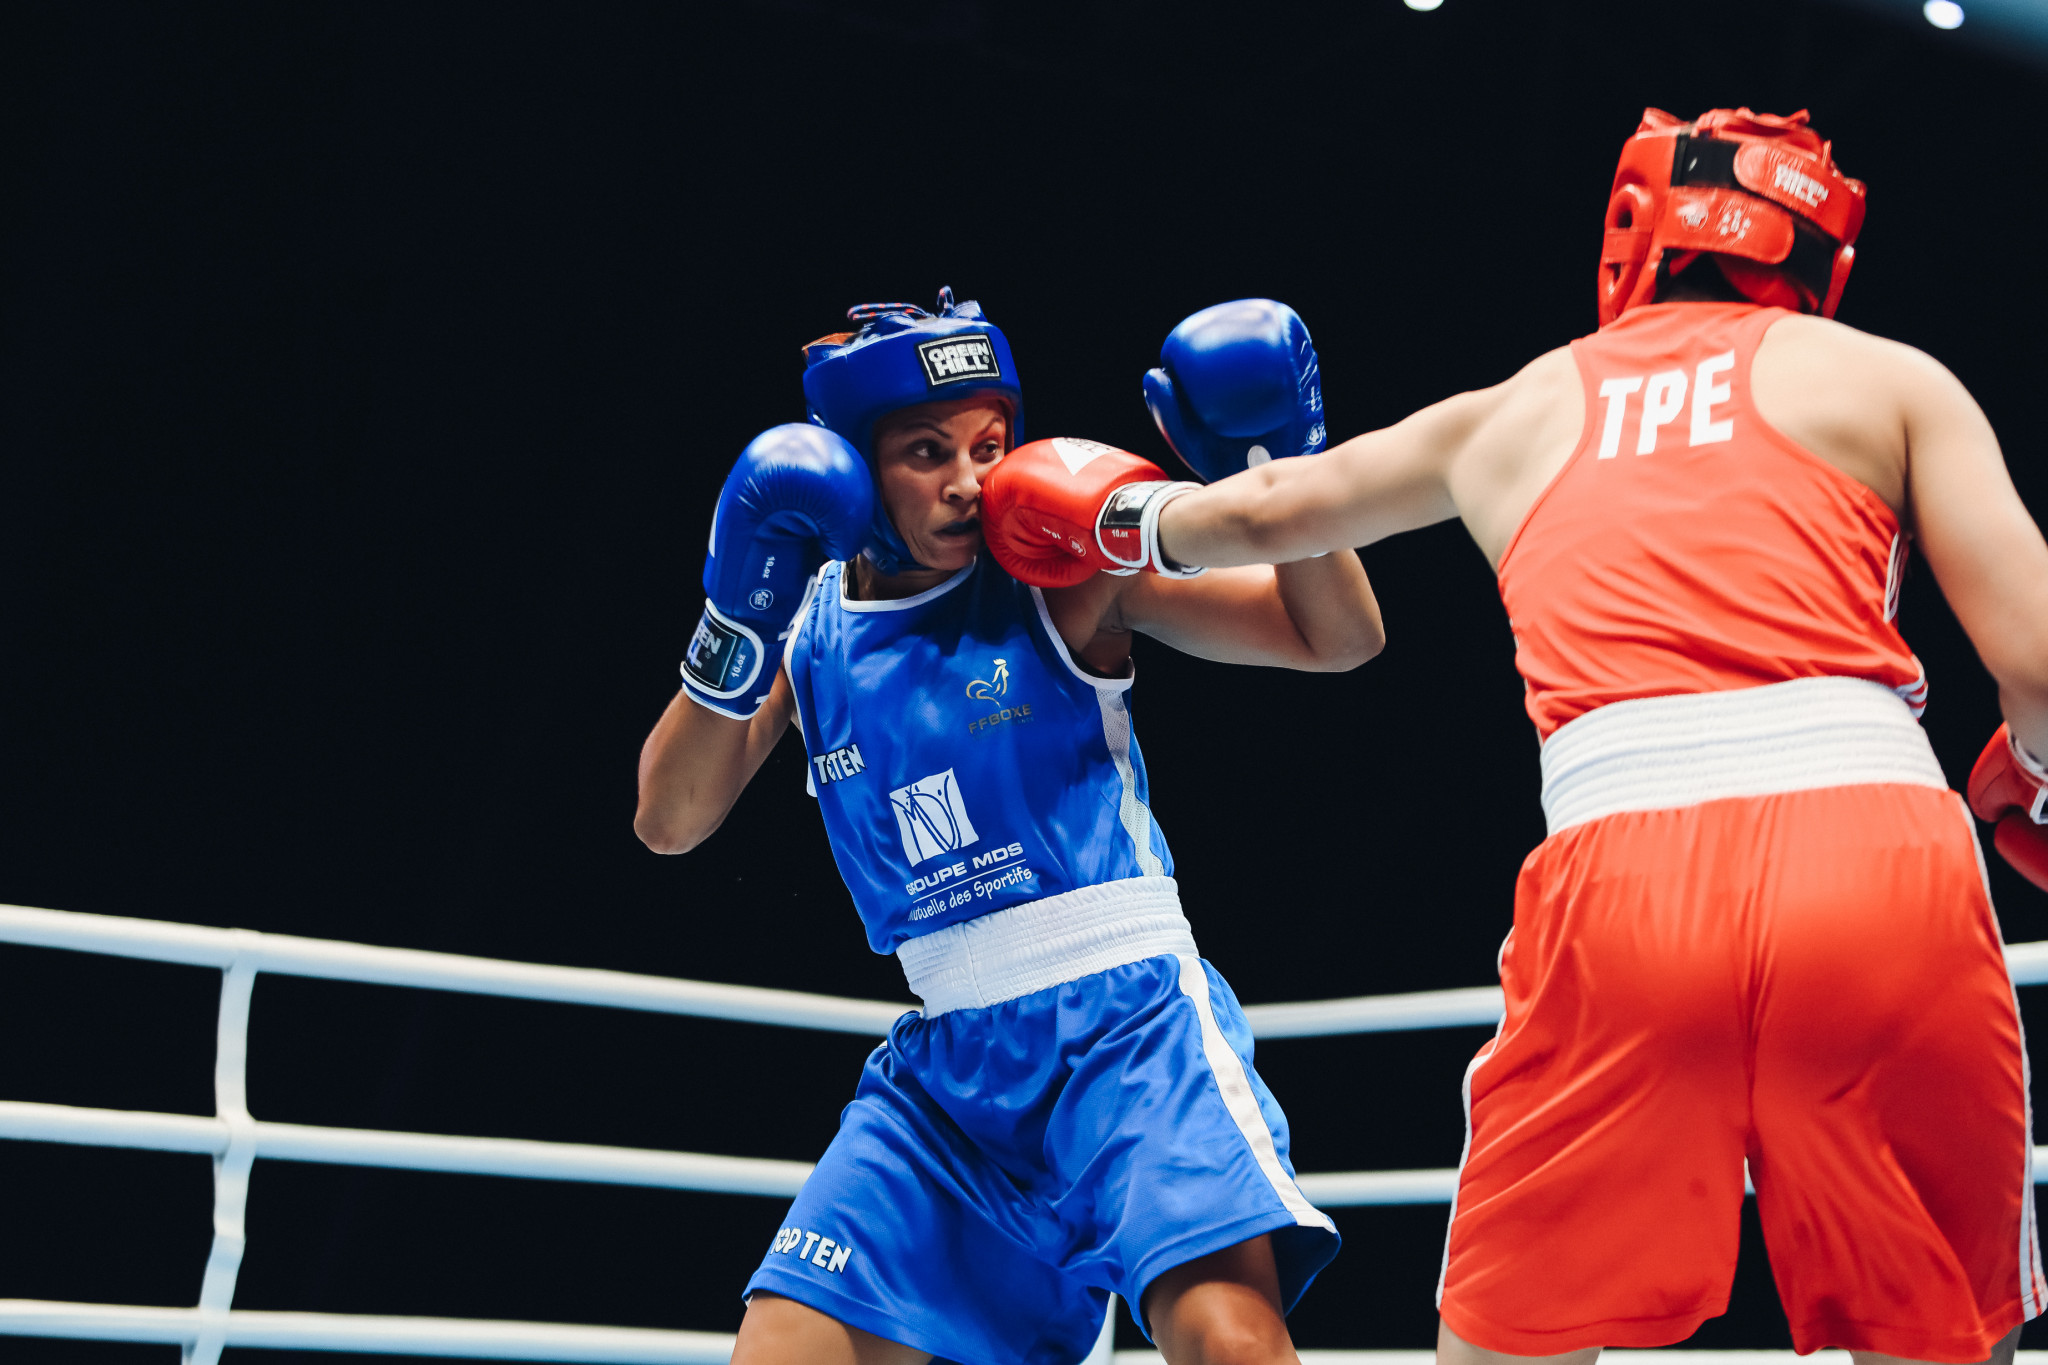 Compatriot and welterweight top seed, Chen Nien-Chin, was competing against Emilie Sonvico of France ©AIBA